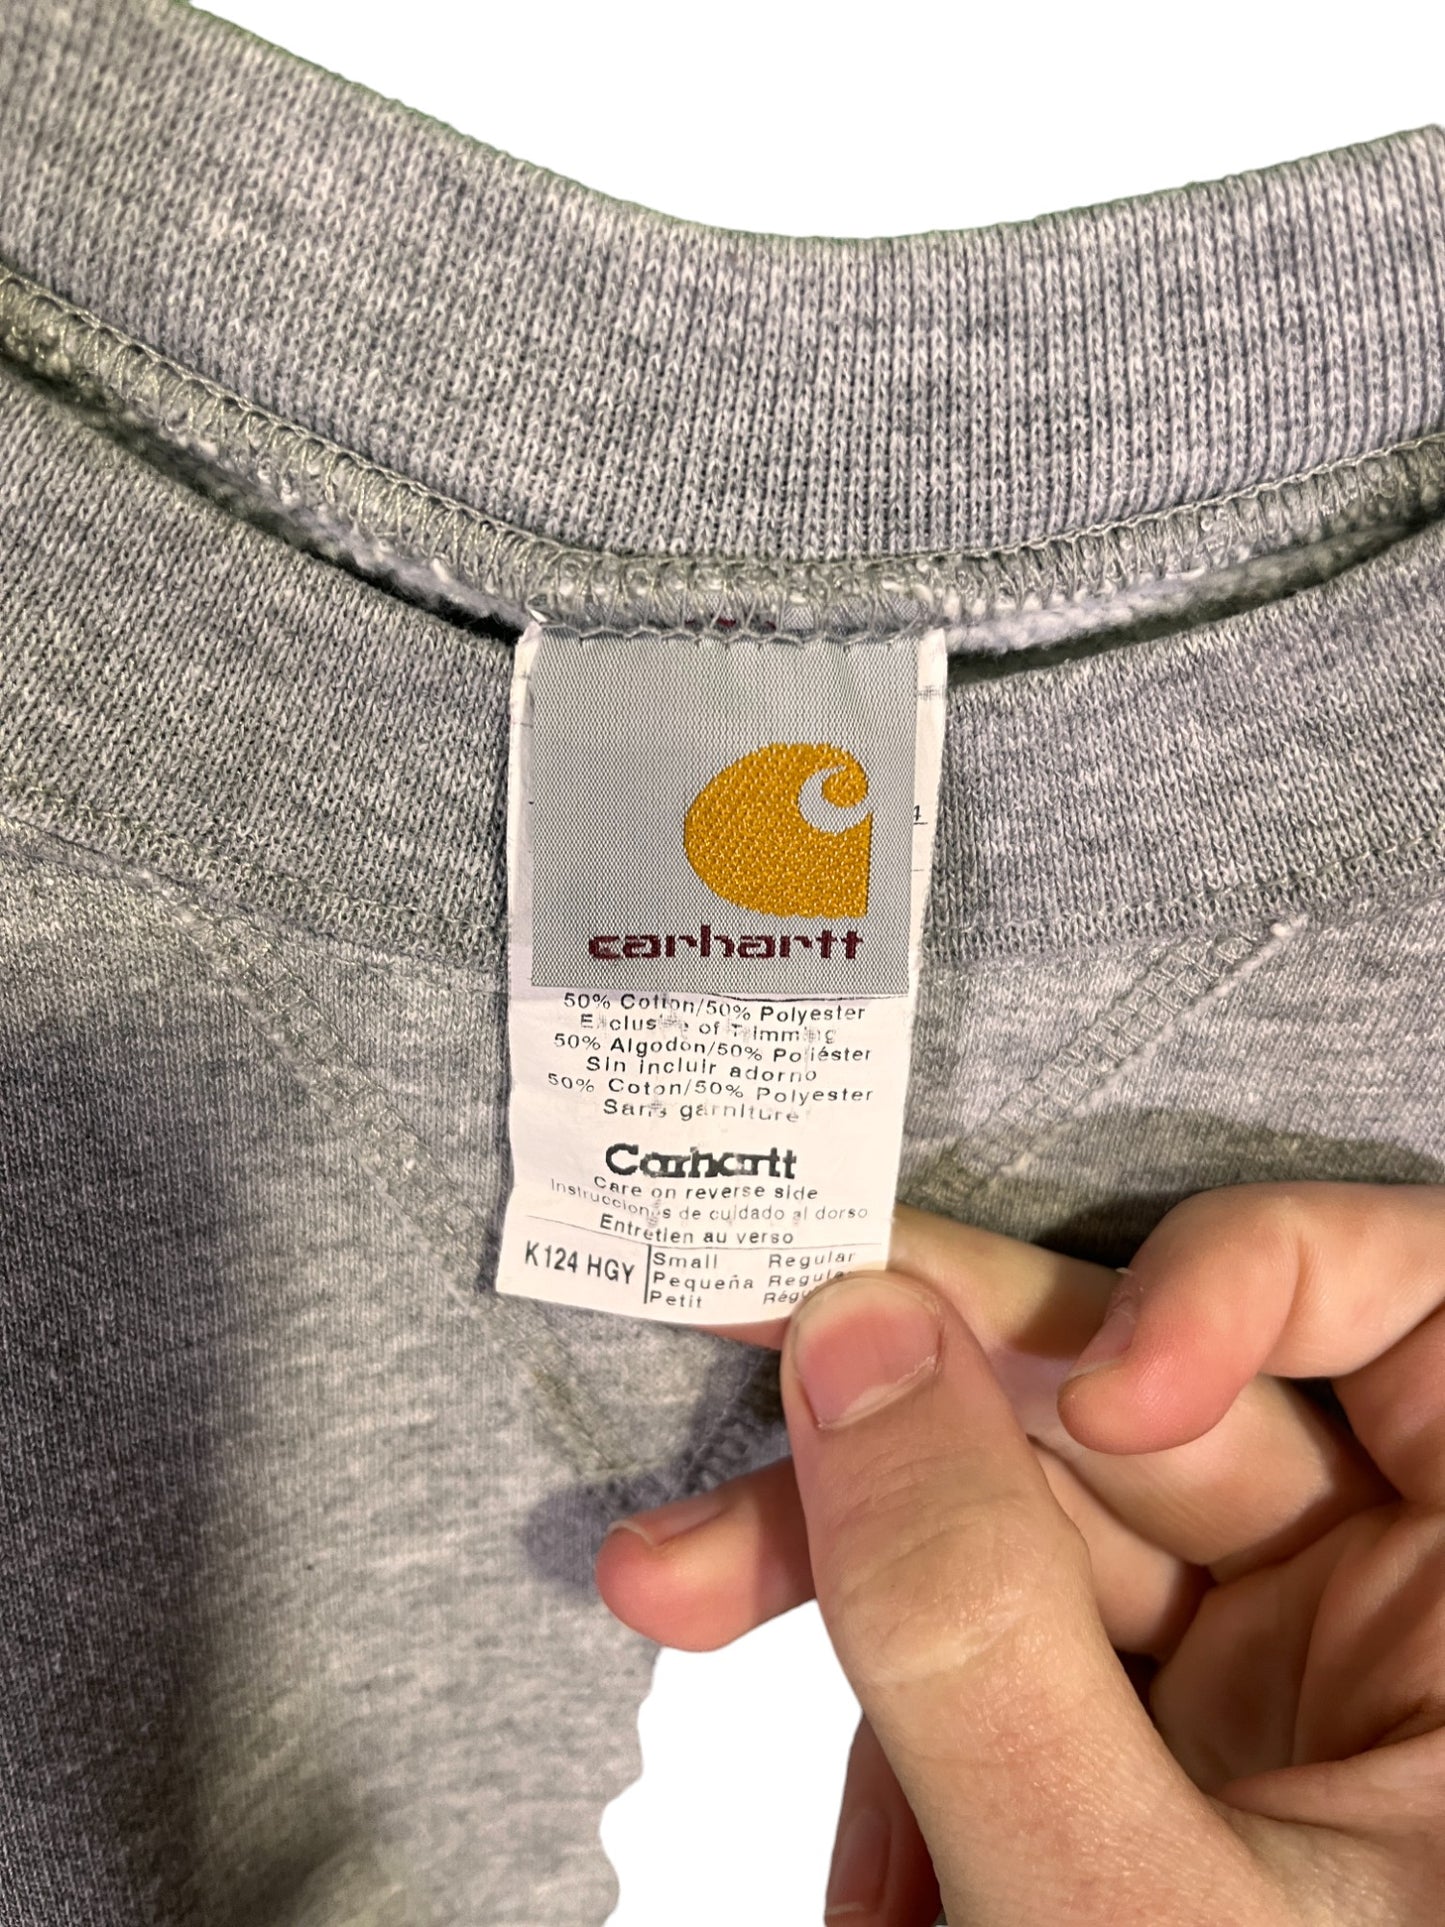 Vintage Carhartt Grey Spell Out Crewneck Embroidered Sweater K124 Size Small